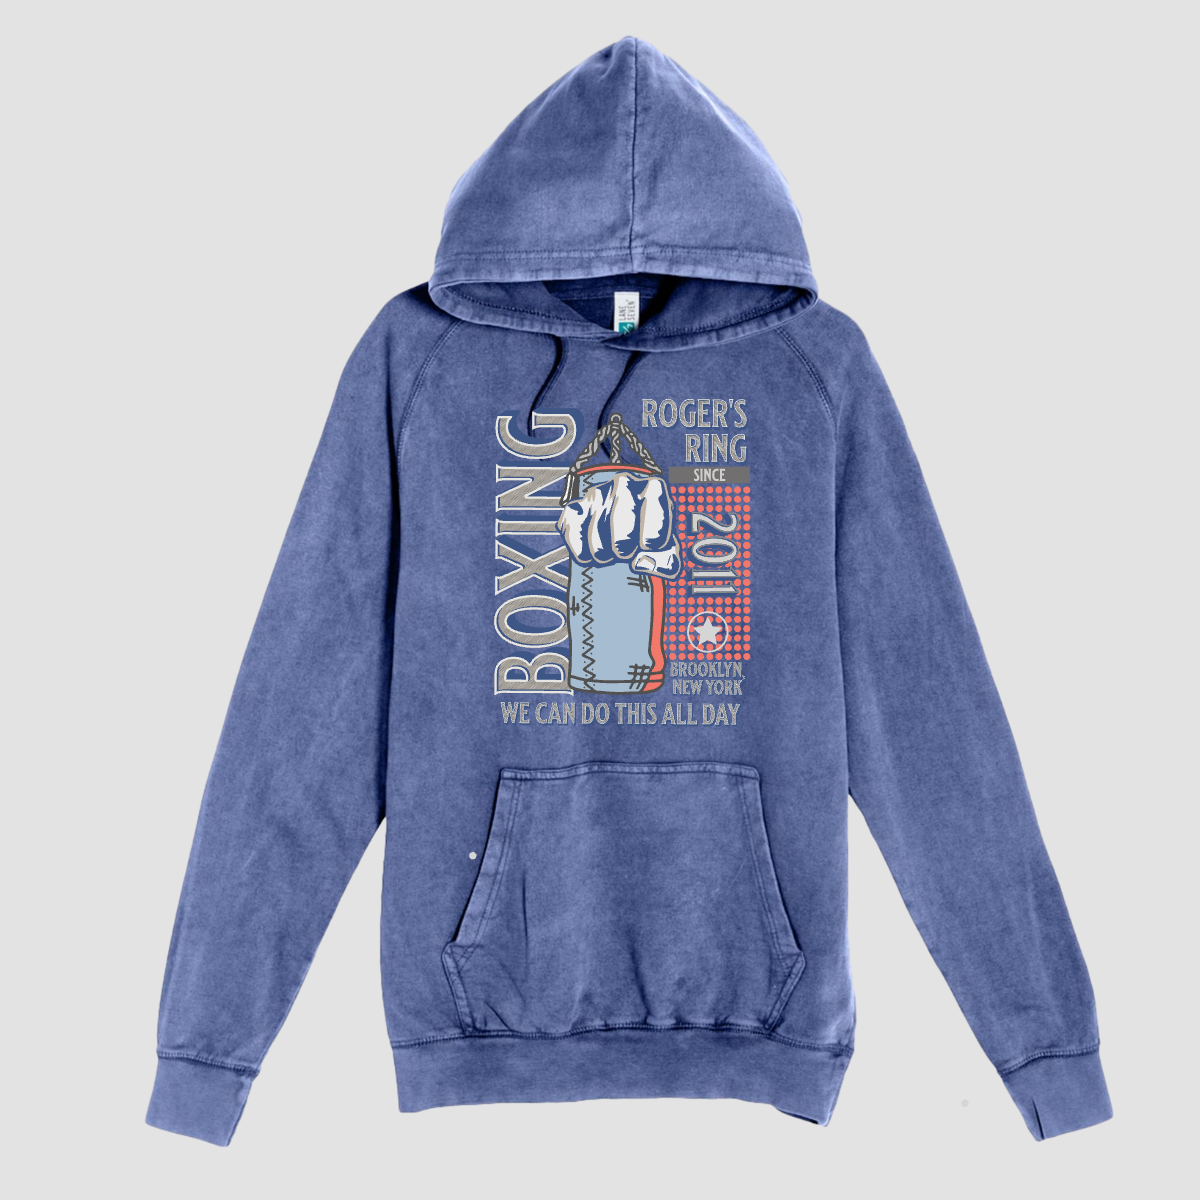 Rogers' Boxing Ring Hoodie